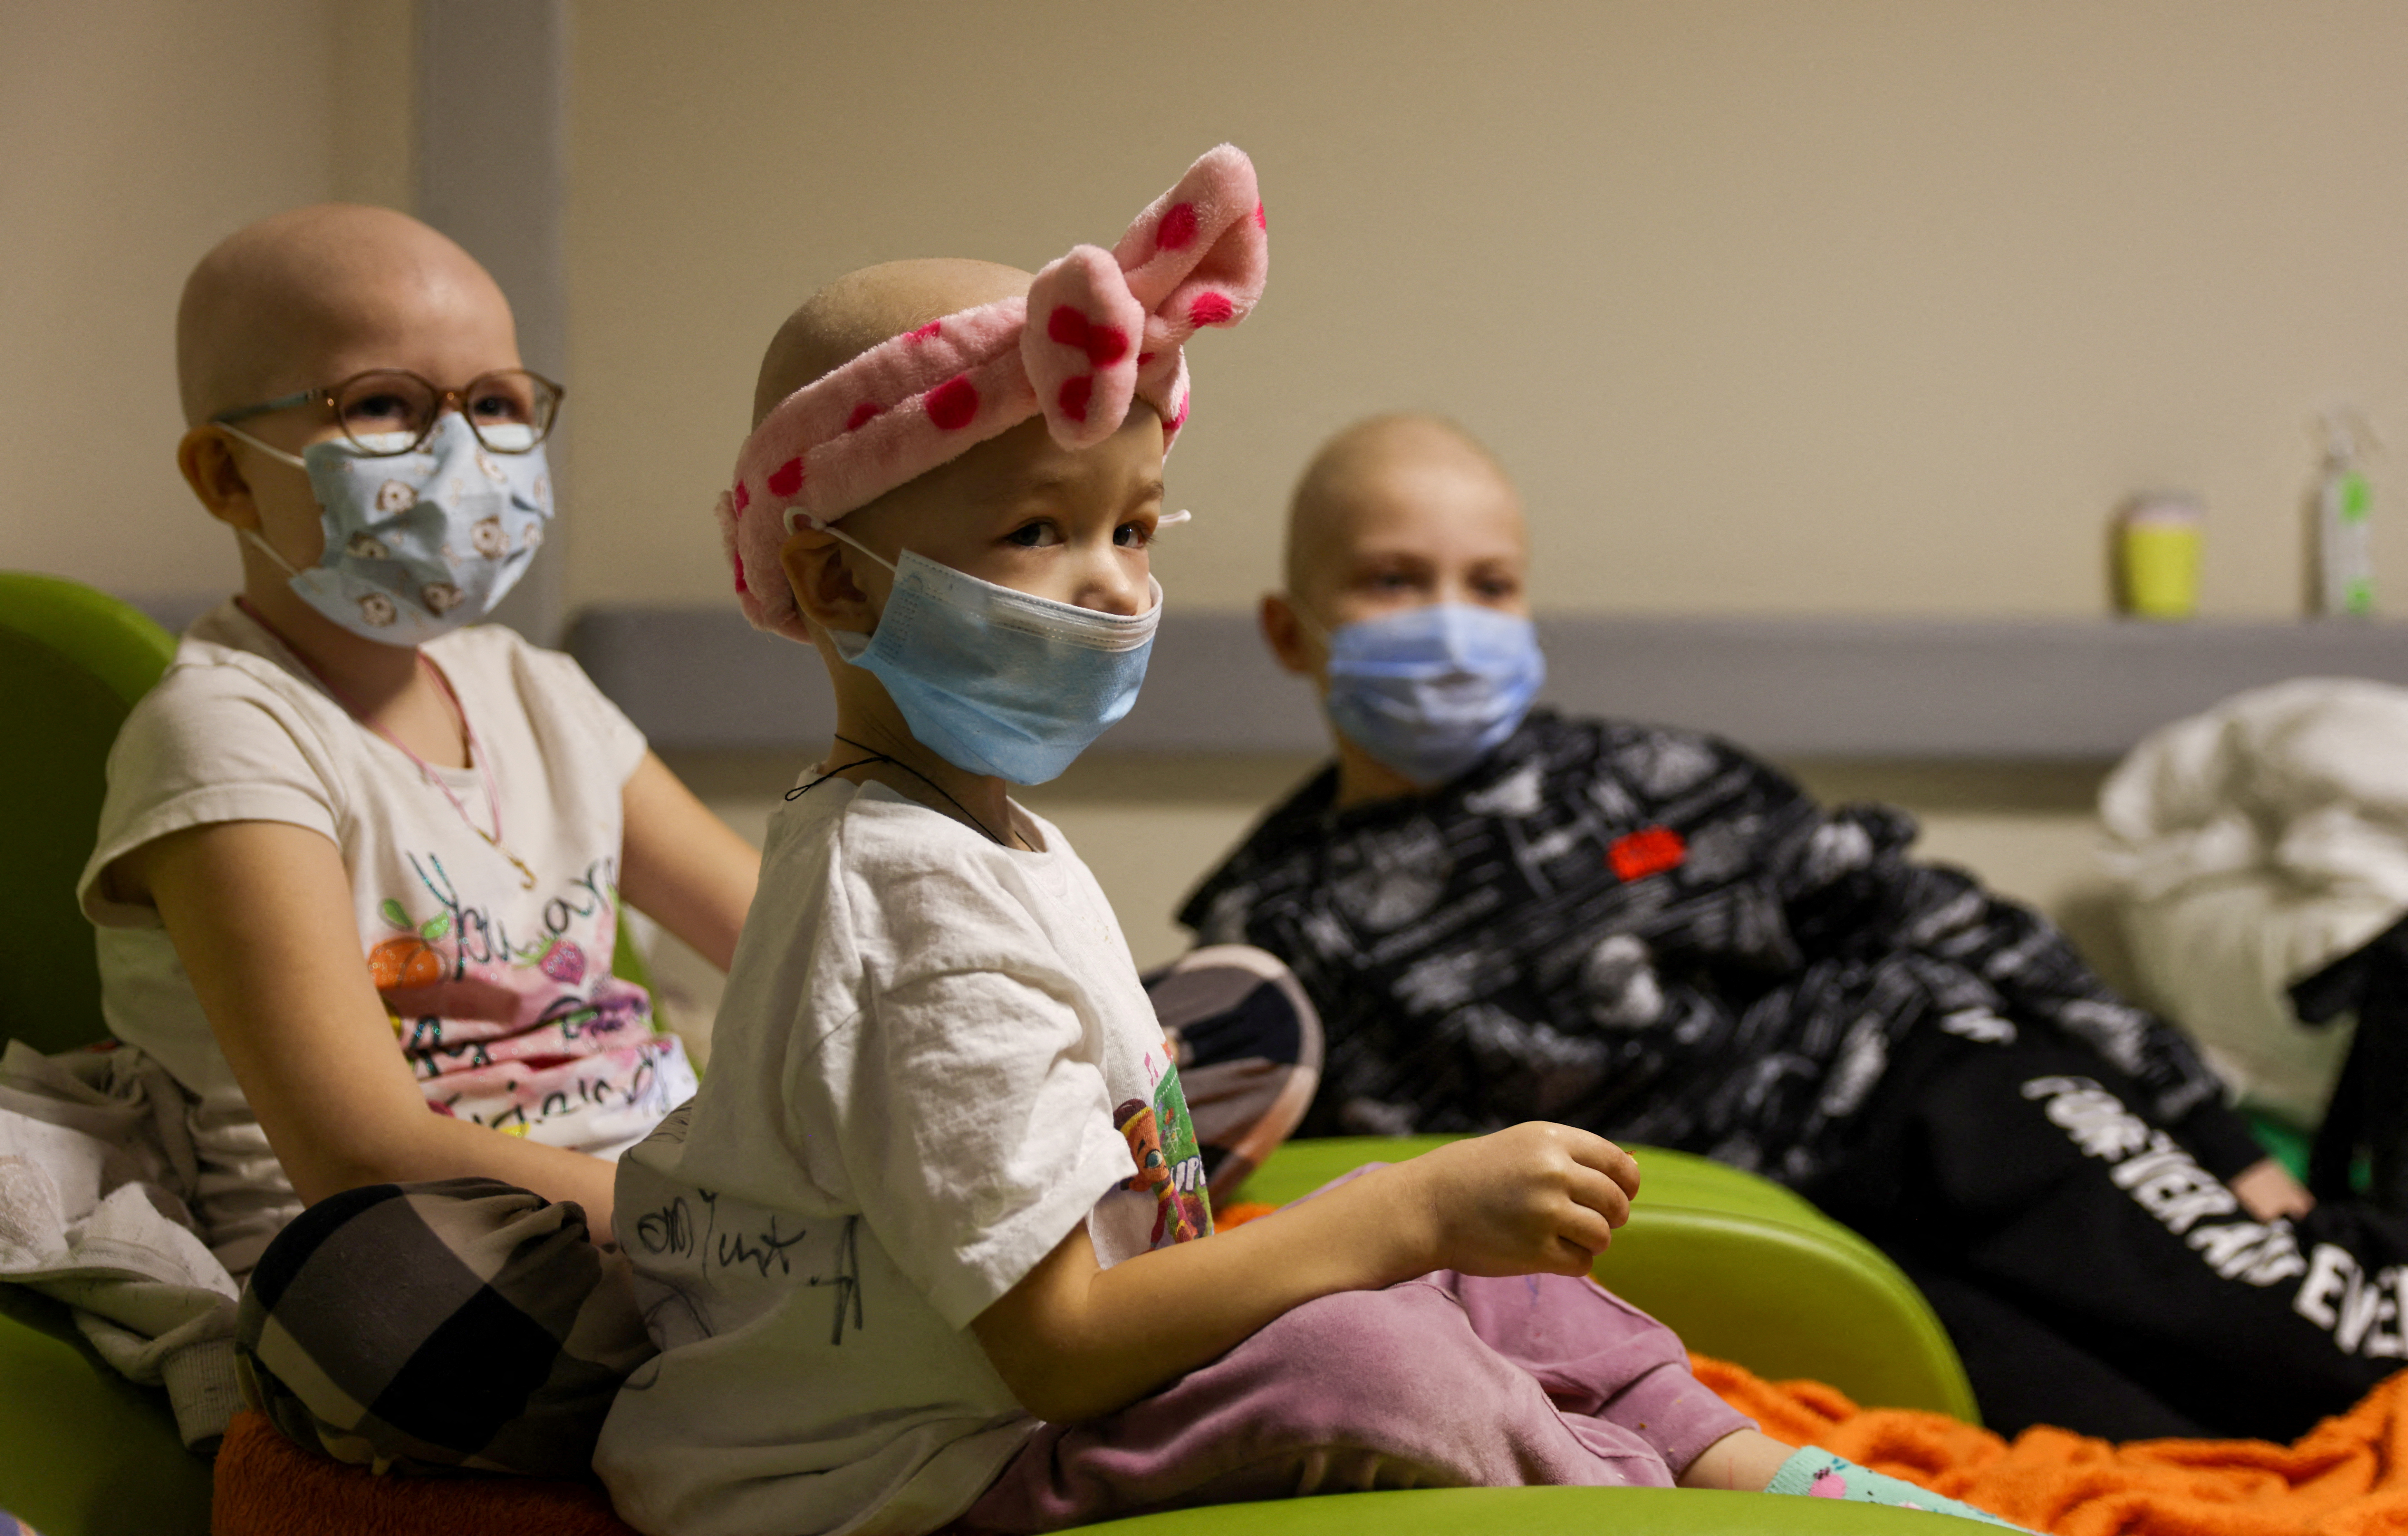 Children patients whose treatments are underway stay in one of the shelters of Okhmadet Children's Hospital